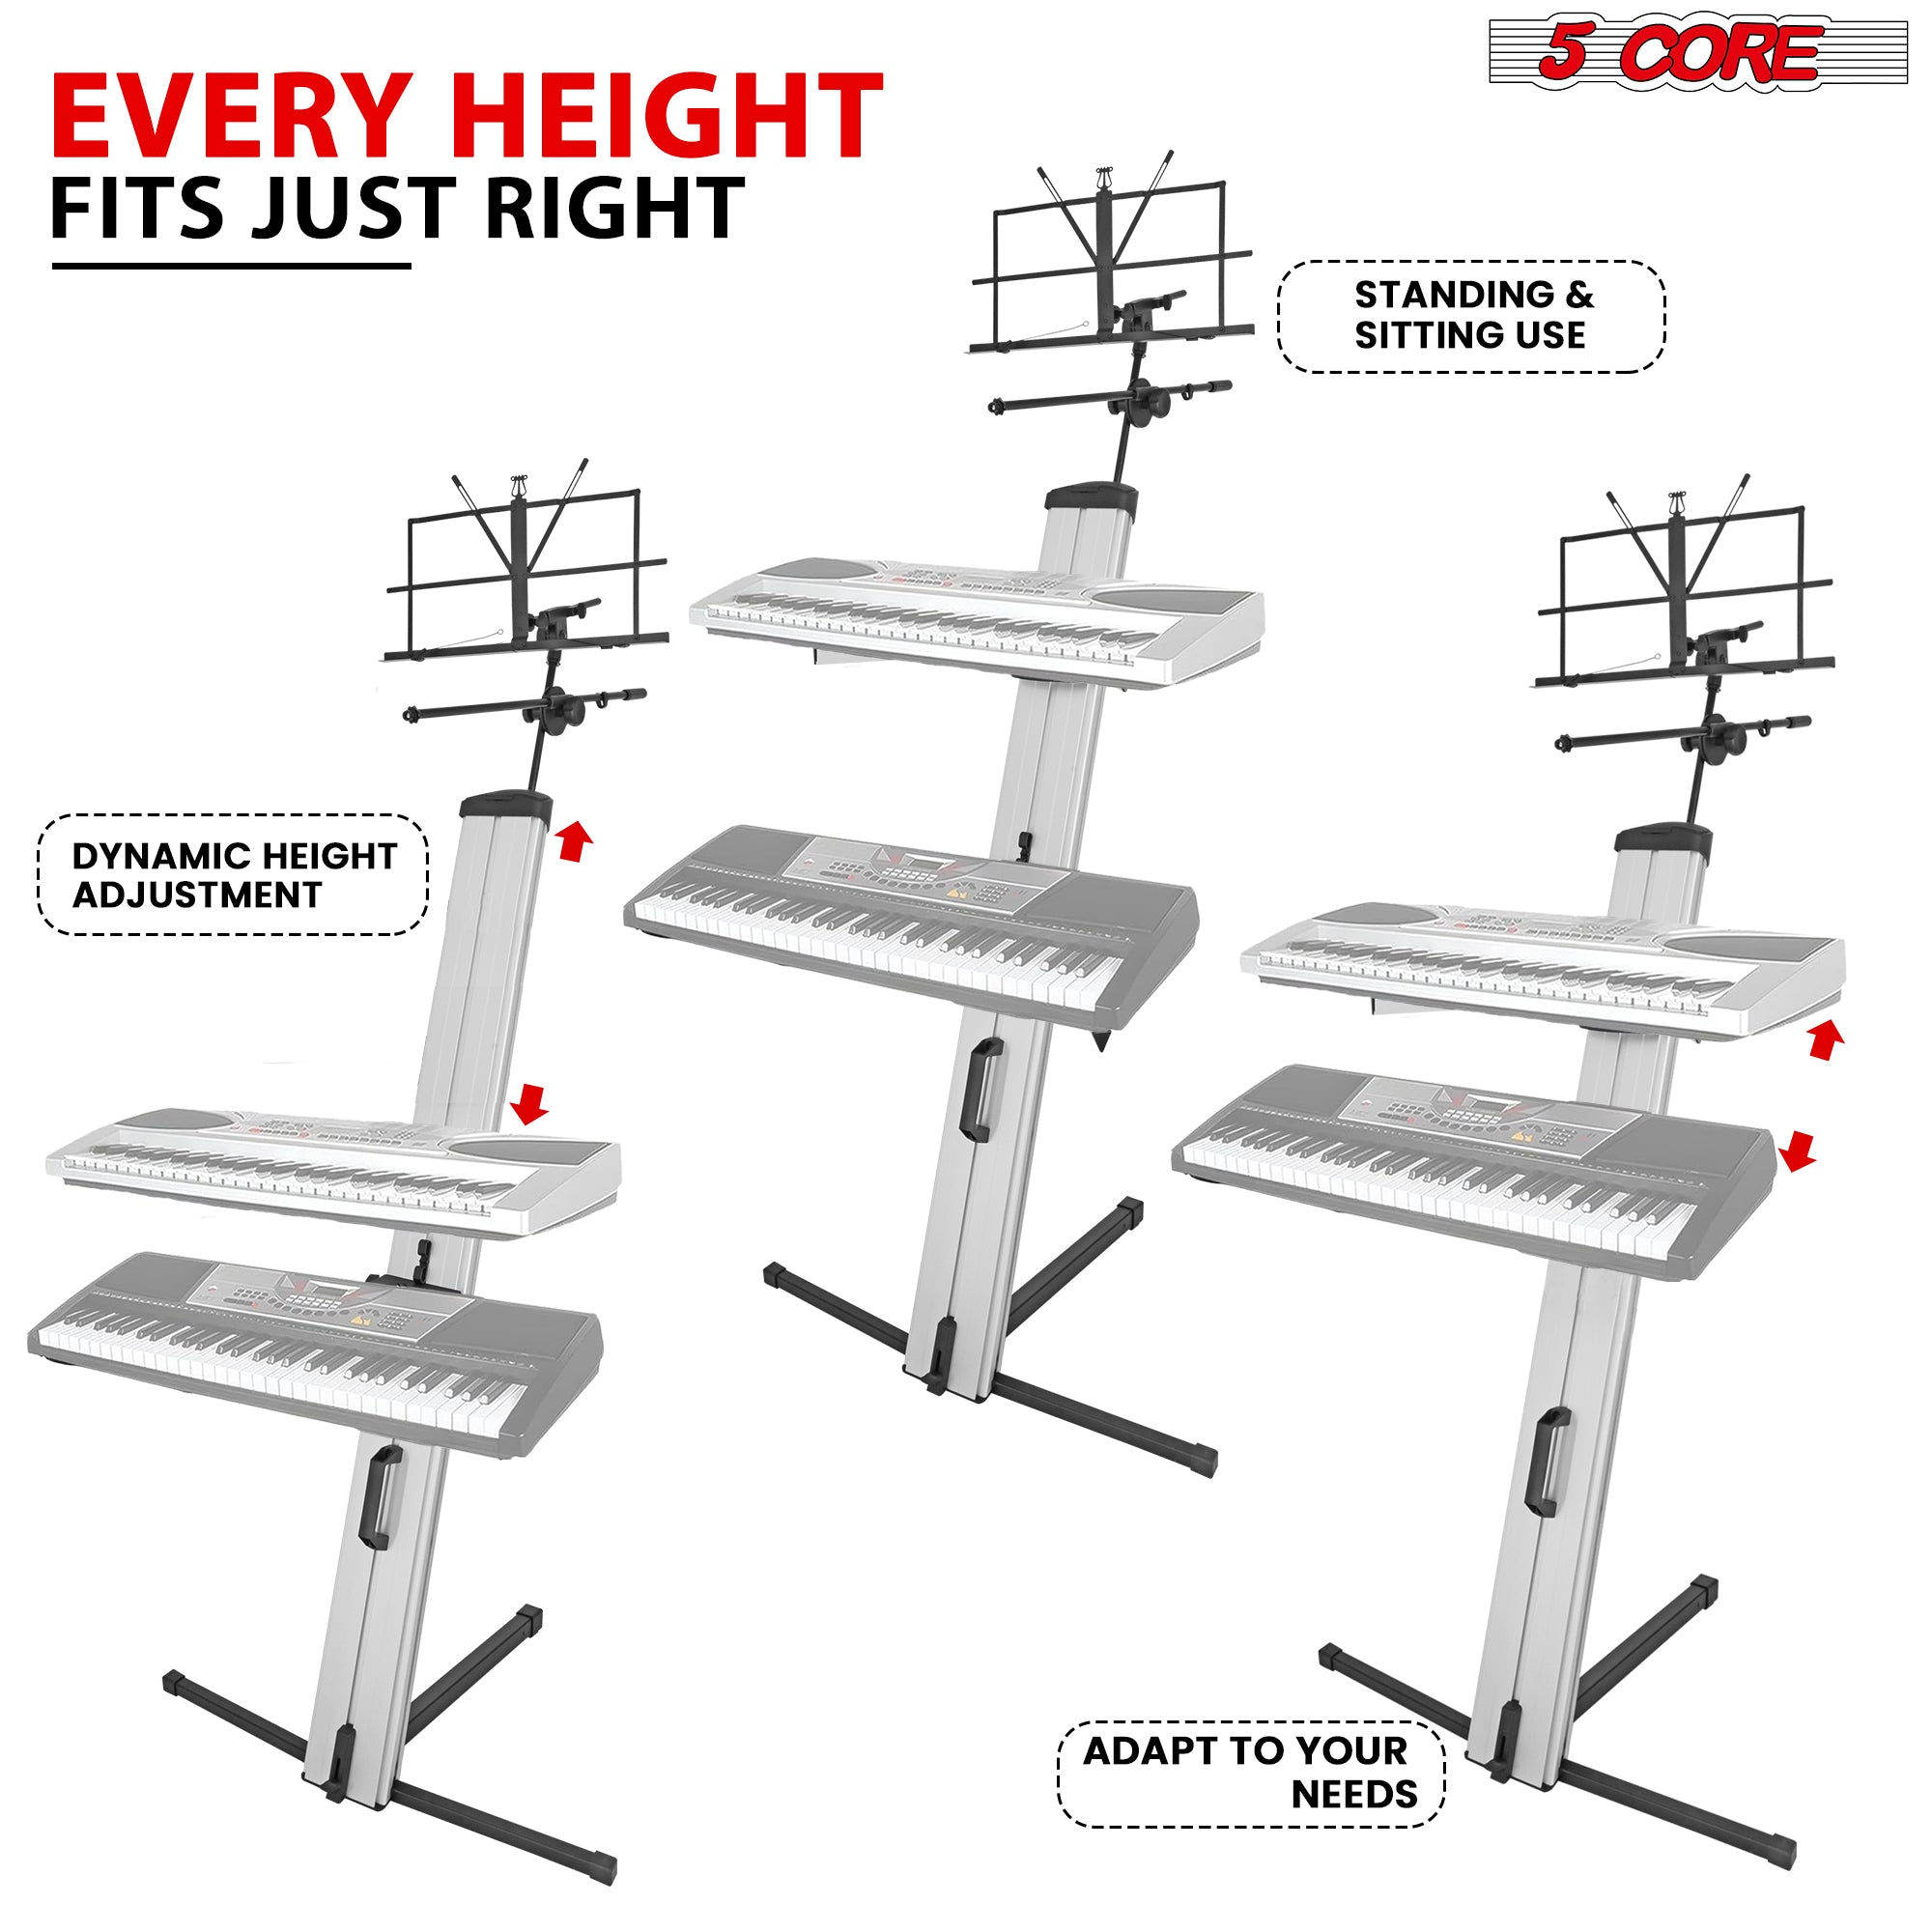 5 Core Column Keyboard Stand Riser 2 Tier w Mic Boom Arm Sheet Music Holder • Two Stage Tower Rack